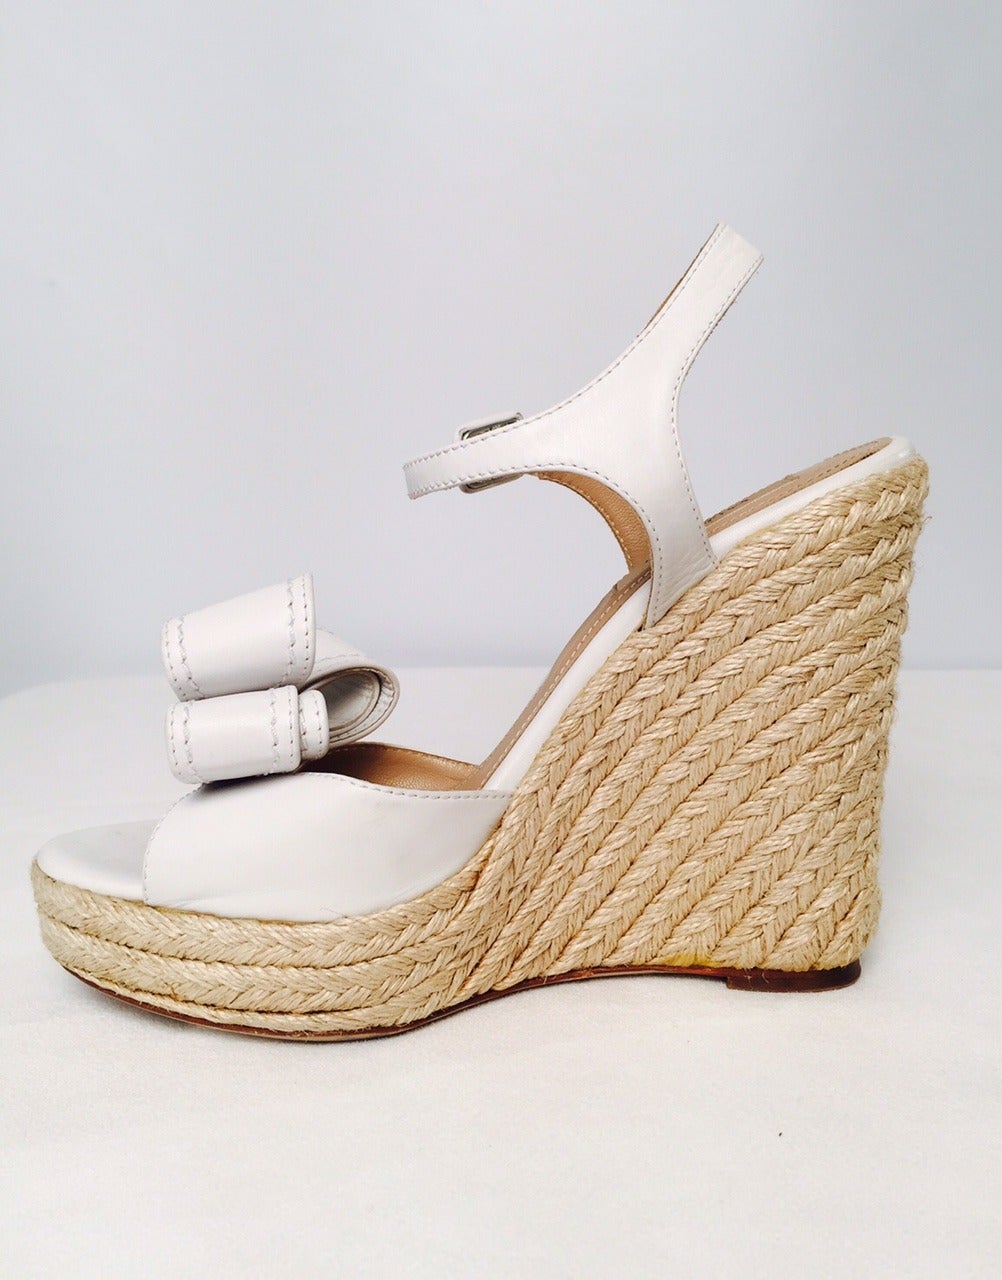 Valentino Garavani High Heel Espadrille Wedge Sandals are worthy of ANY Riviera...Spanish, French, and Italian (of course!).  Features plaited fiber, adjustable ankle straps, luxurious white leather and tan leather insoles.  Leather soles. 